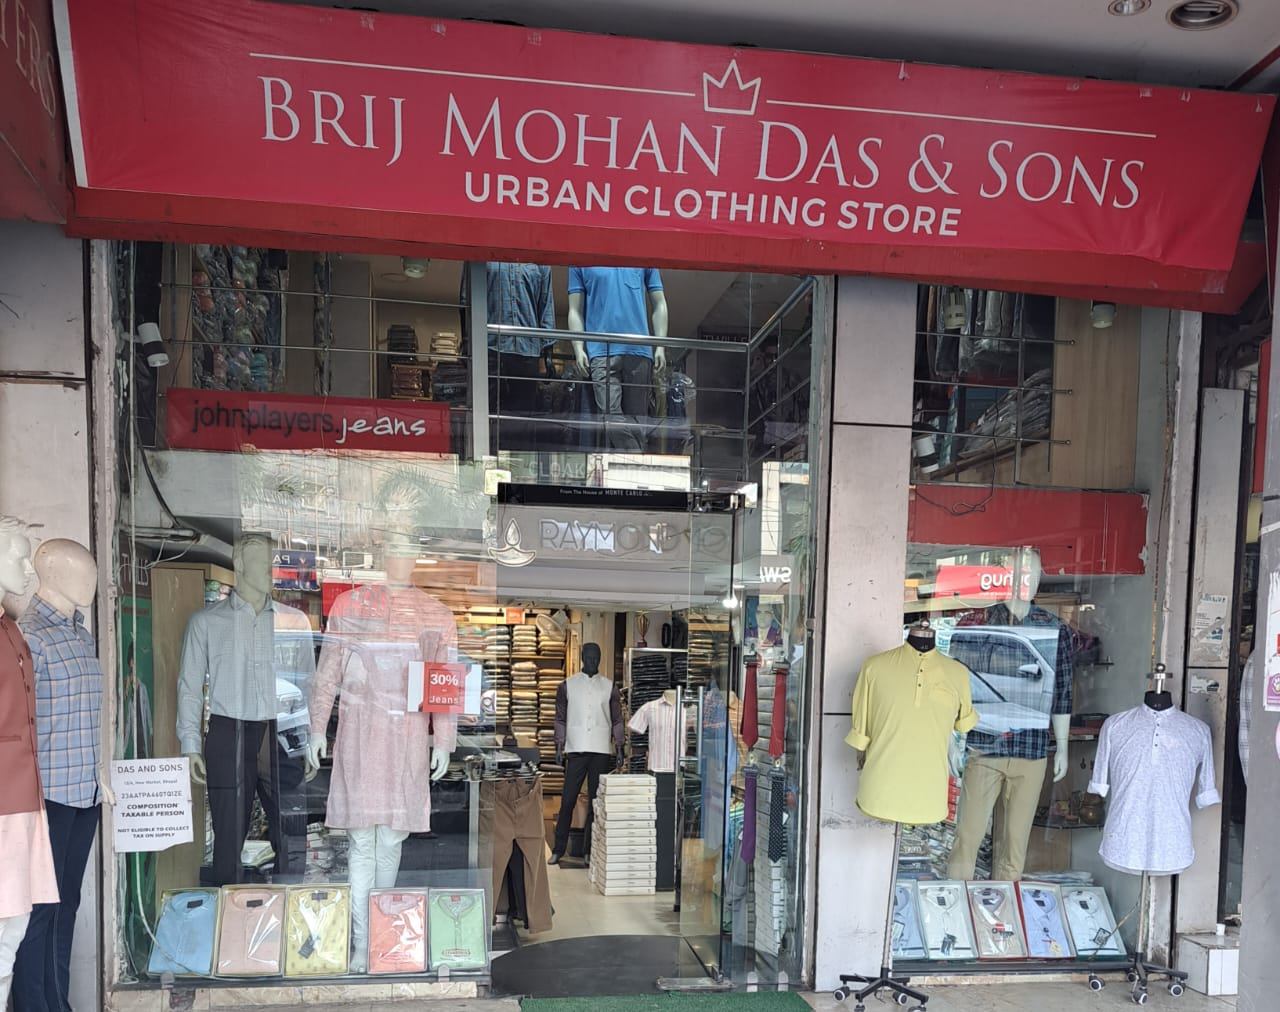 Upto 30% Off Deal on Clothing @BRIJ MOHAN DAS & SONS, Bhopal